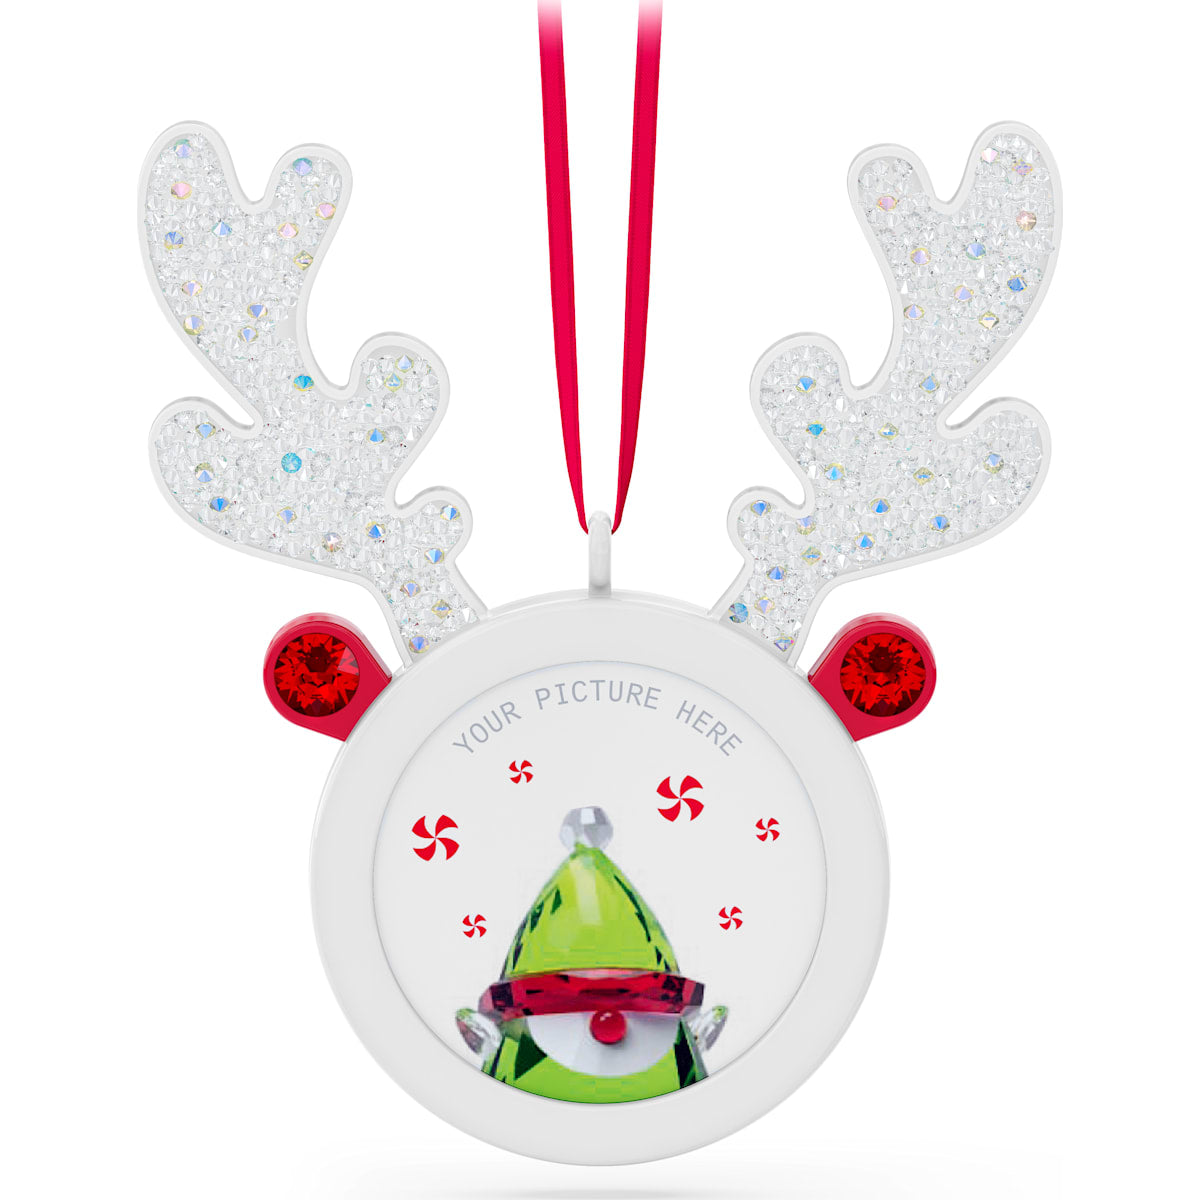 HOLIDAY CHEERS:PICTURE HOLDER REINDEER